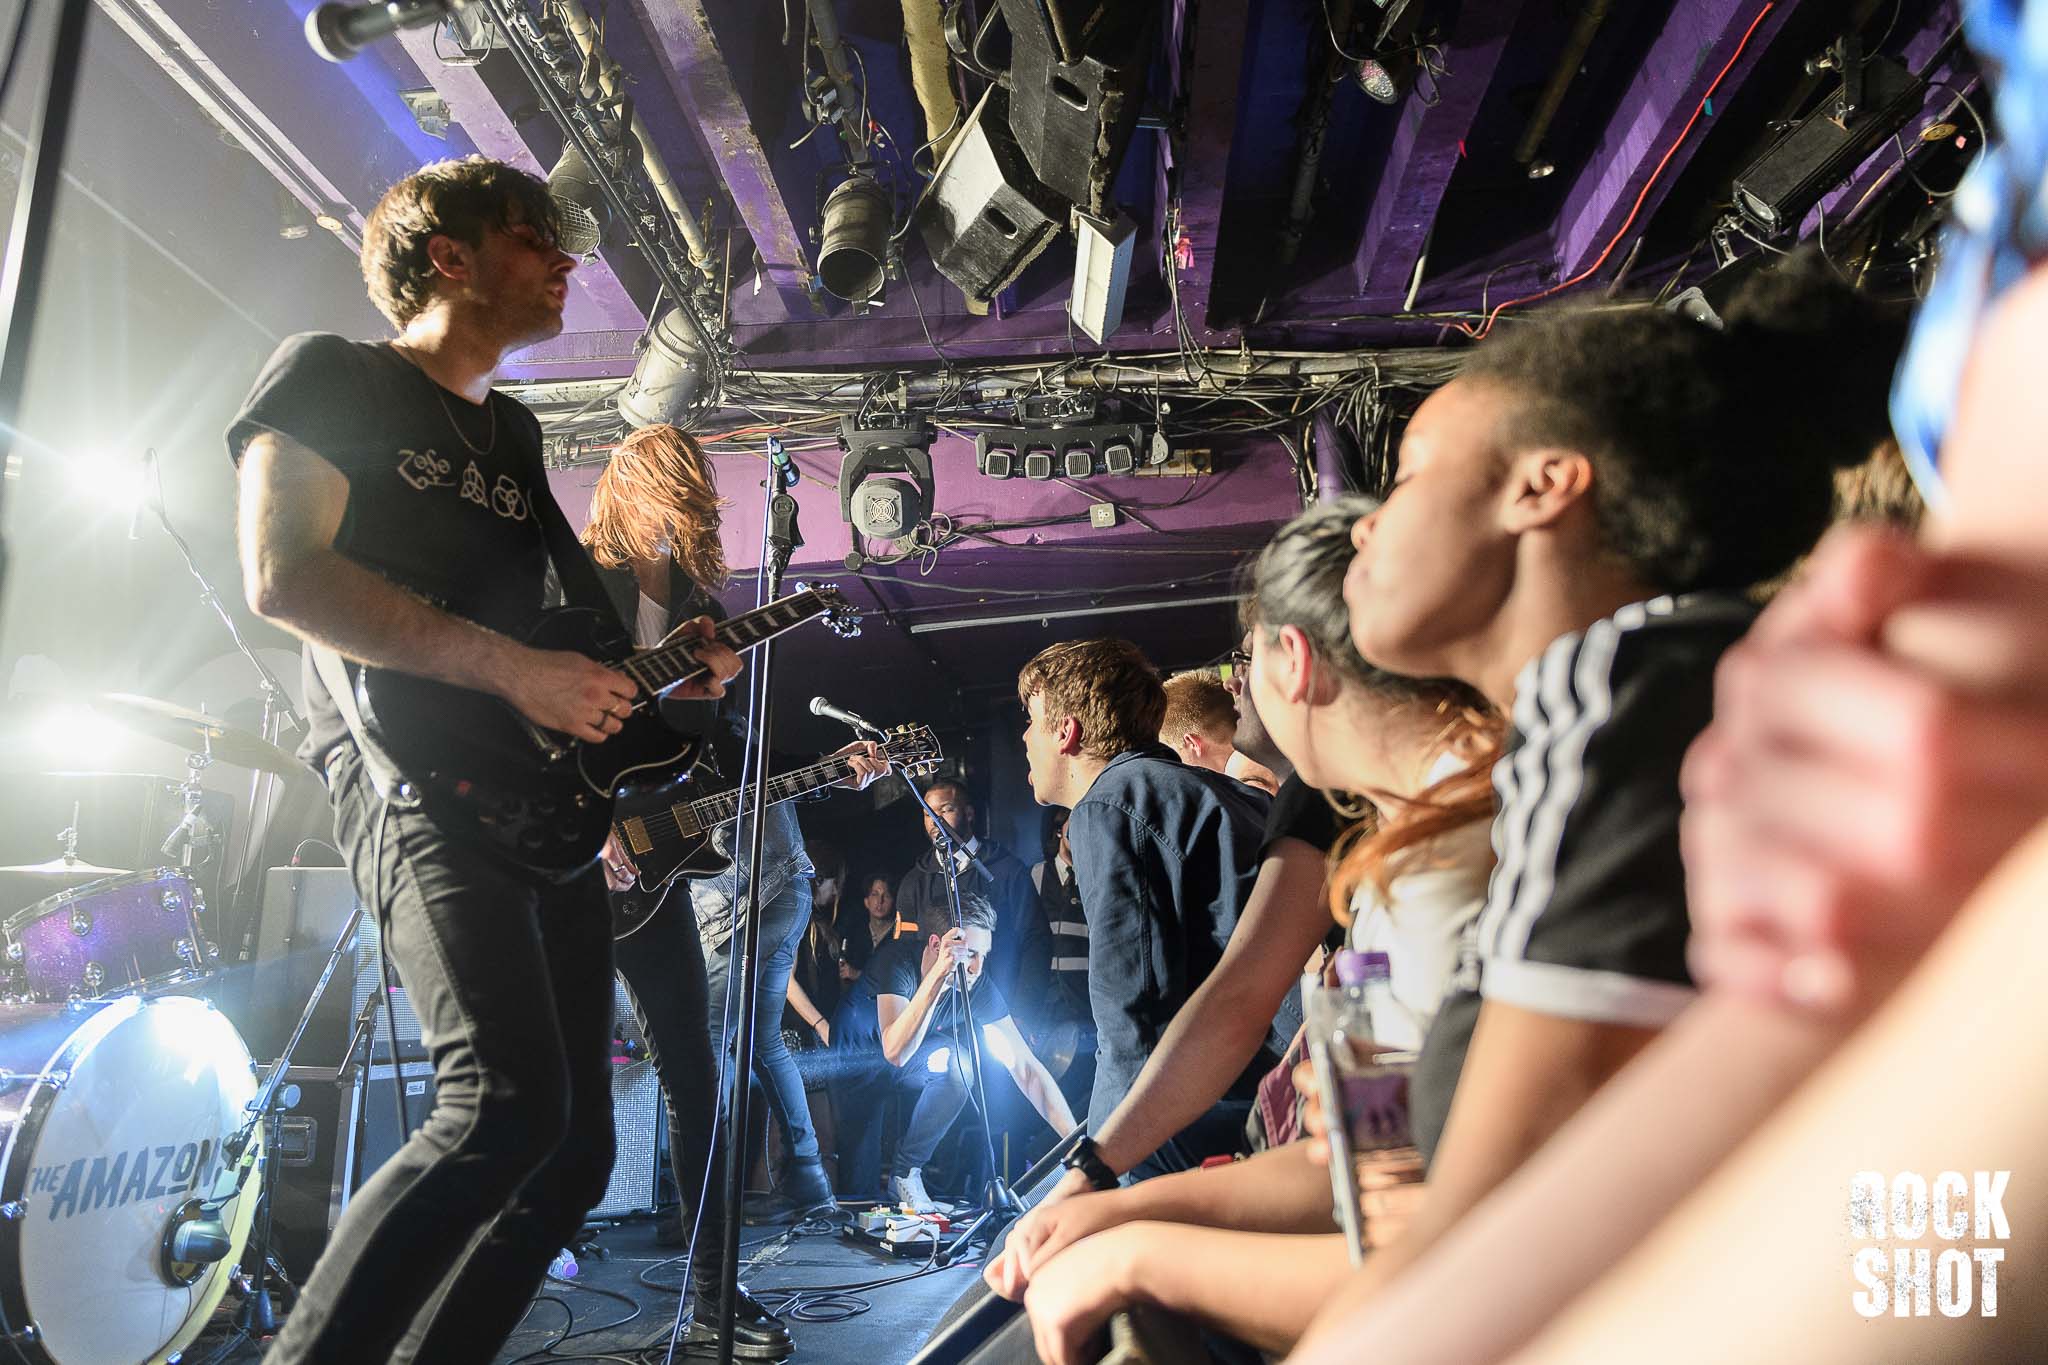 The Amazons performing at Dingwalls, Camden Lock on 12 April 2017